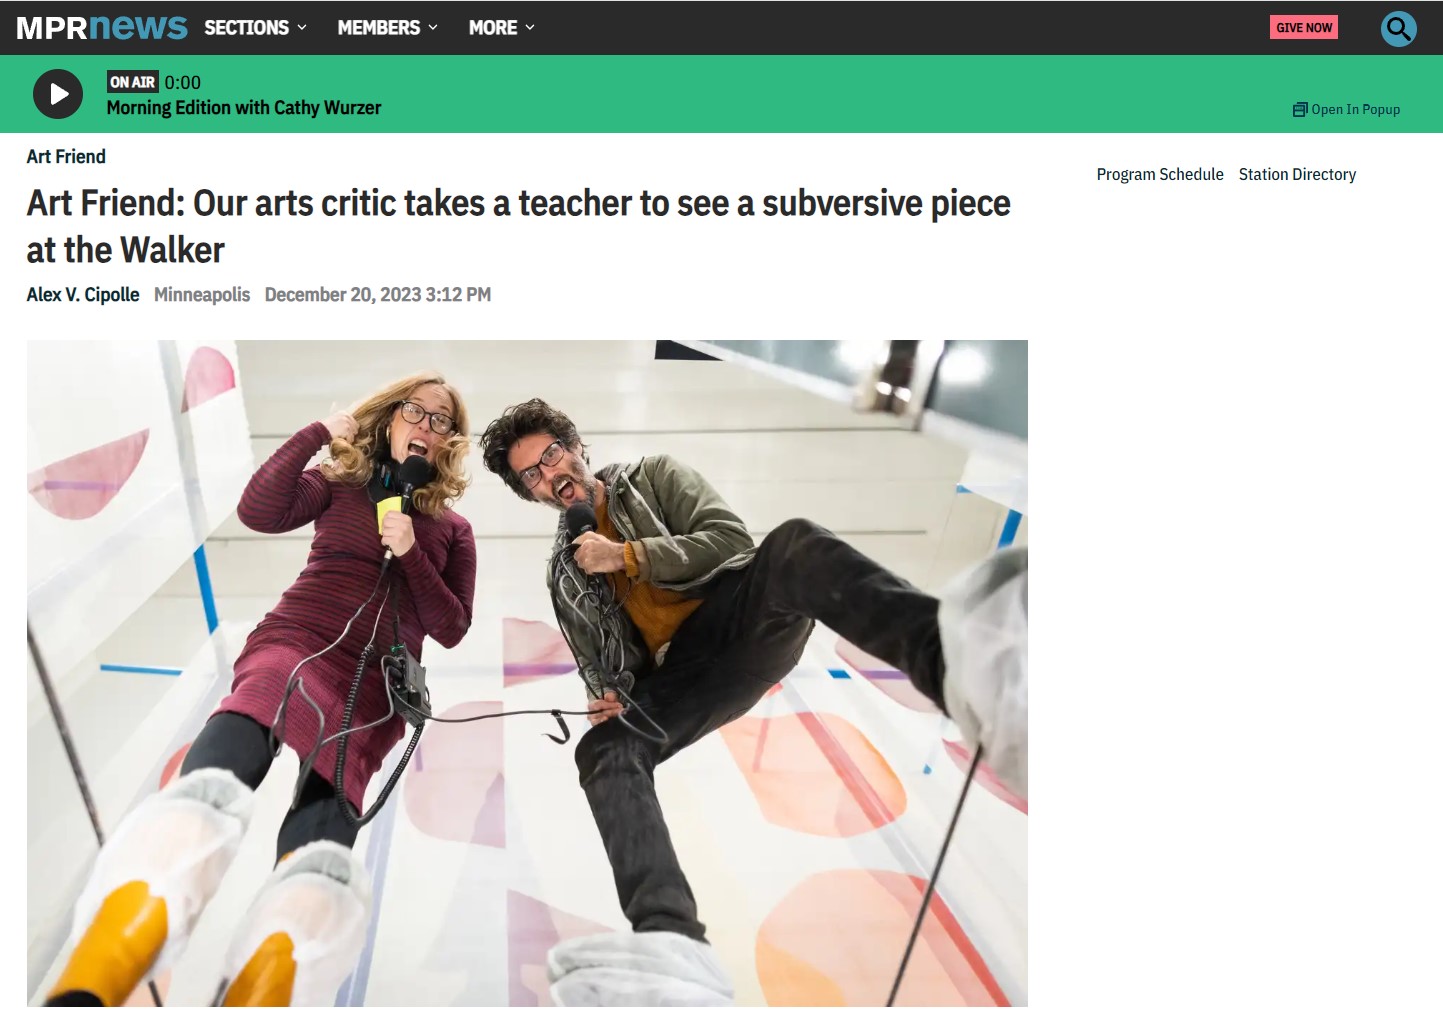 Art Friend: Our arts critic takes a teacher to see a subversive piece at the Walker